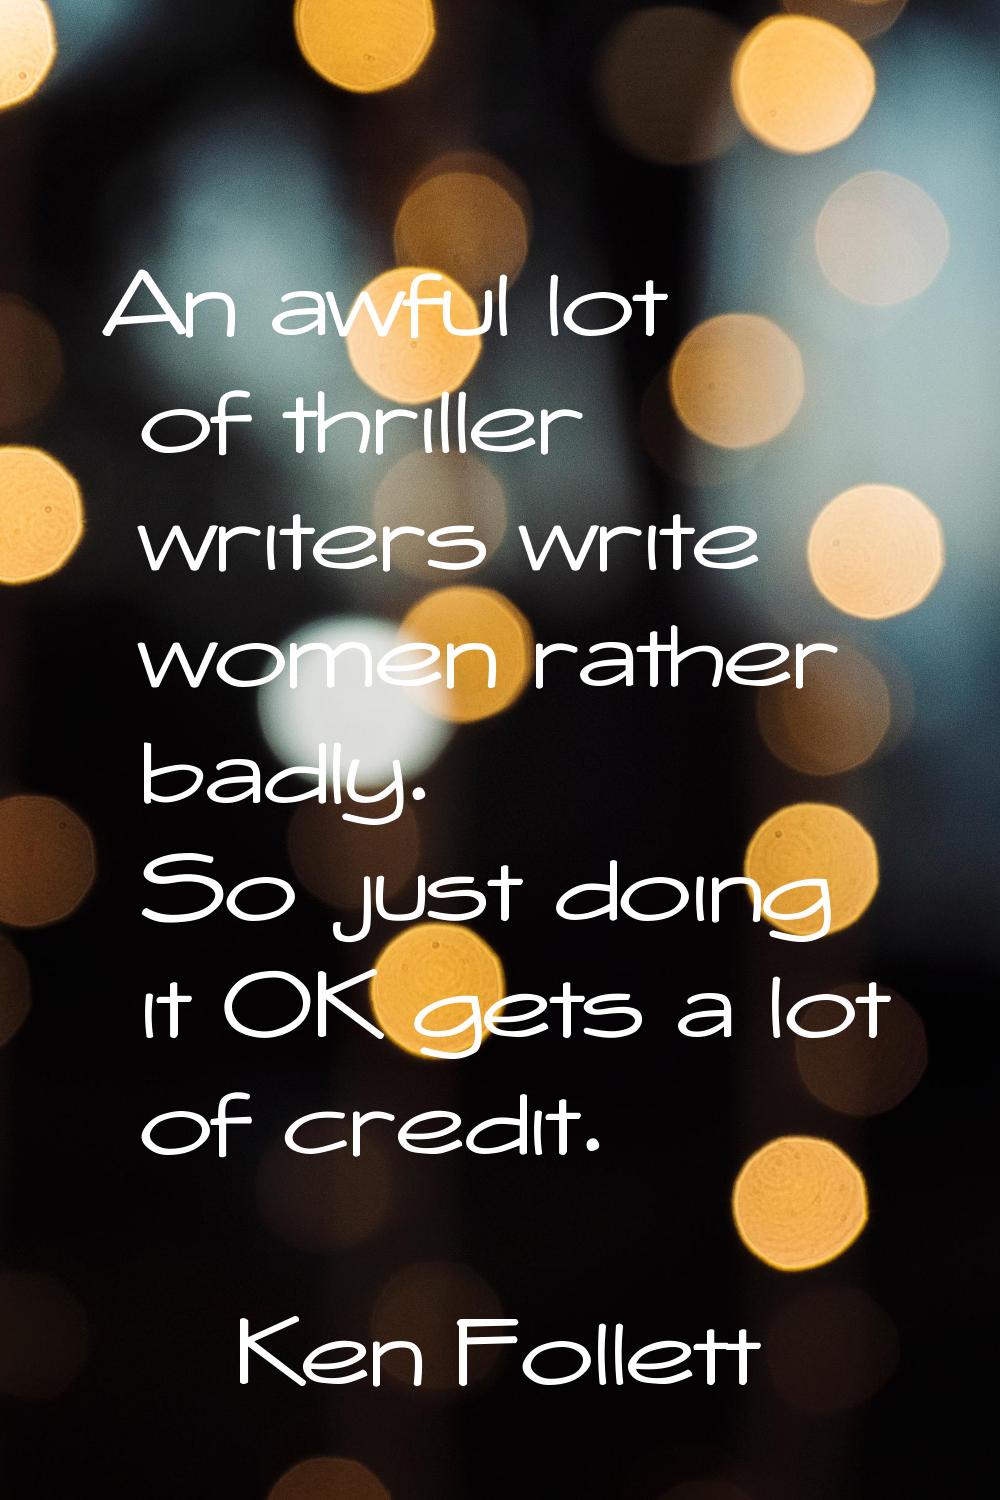 An awful lot of thriller writers write women rather badly. So just doing it OK gets a lot of credit